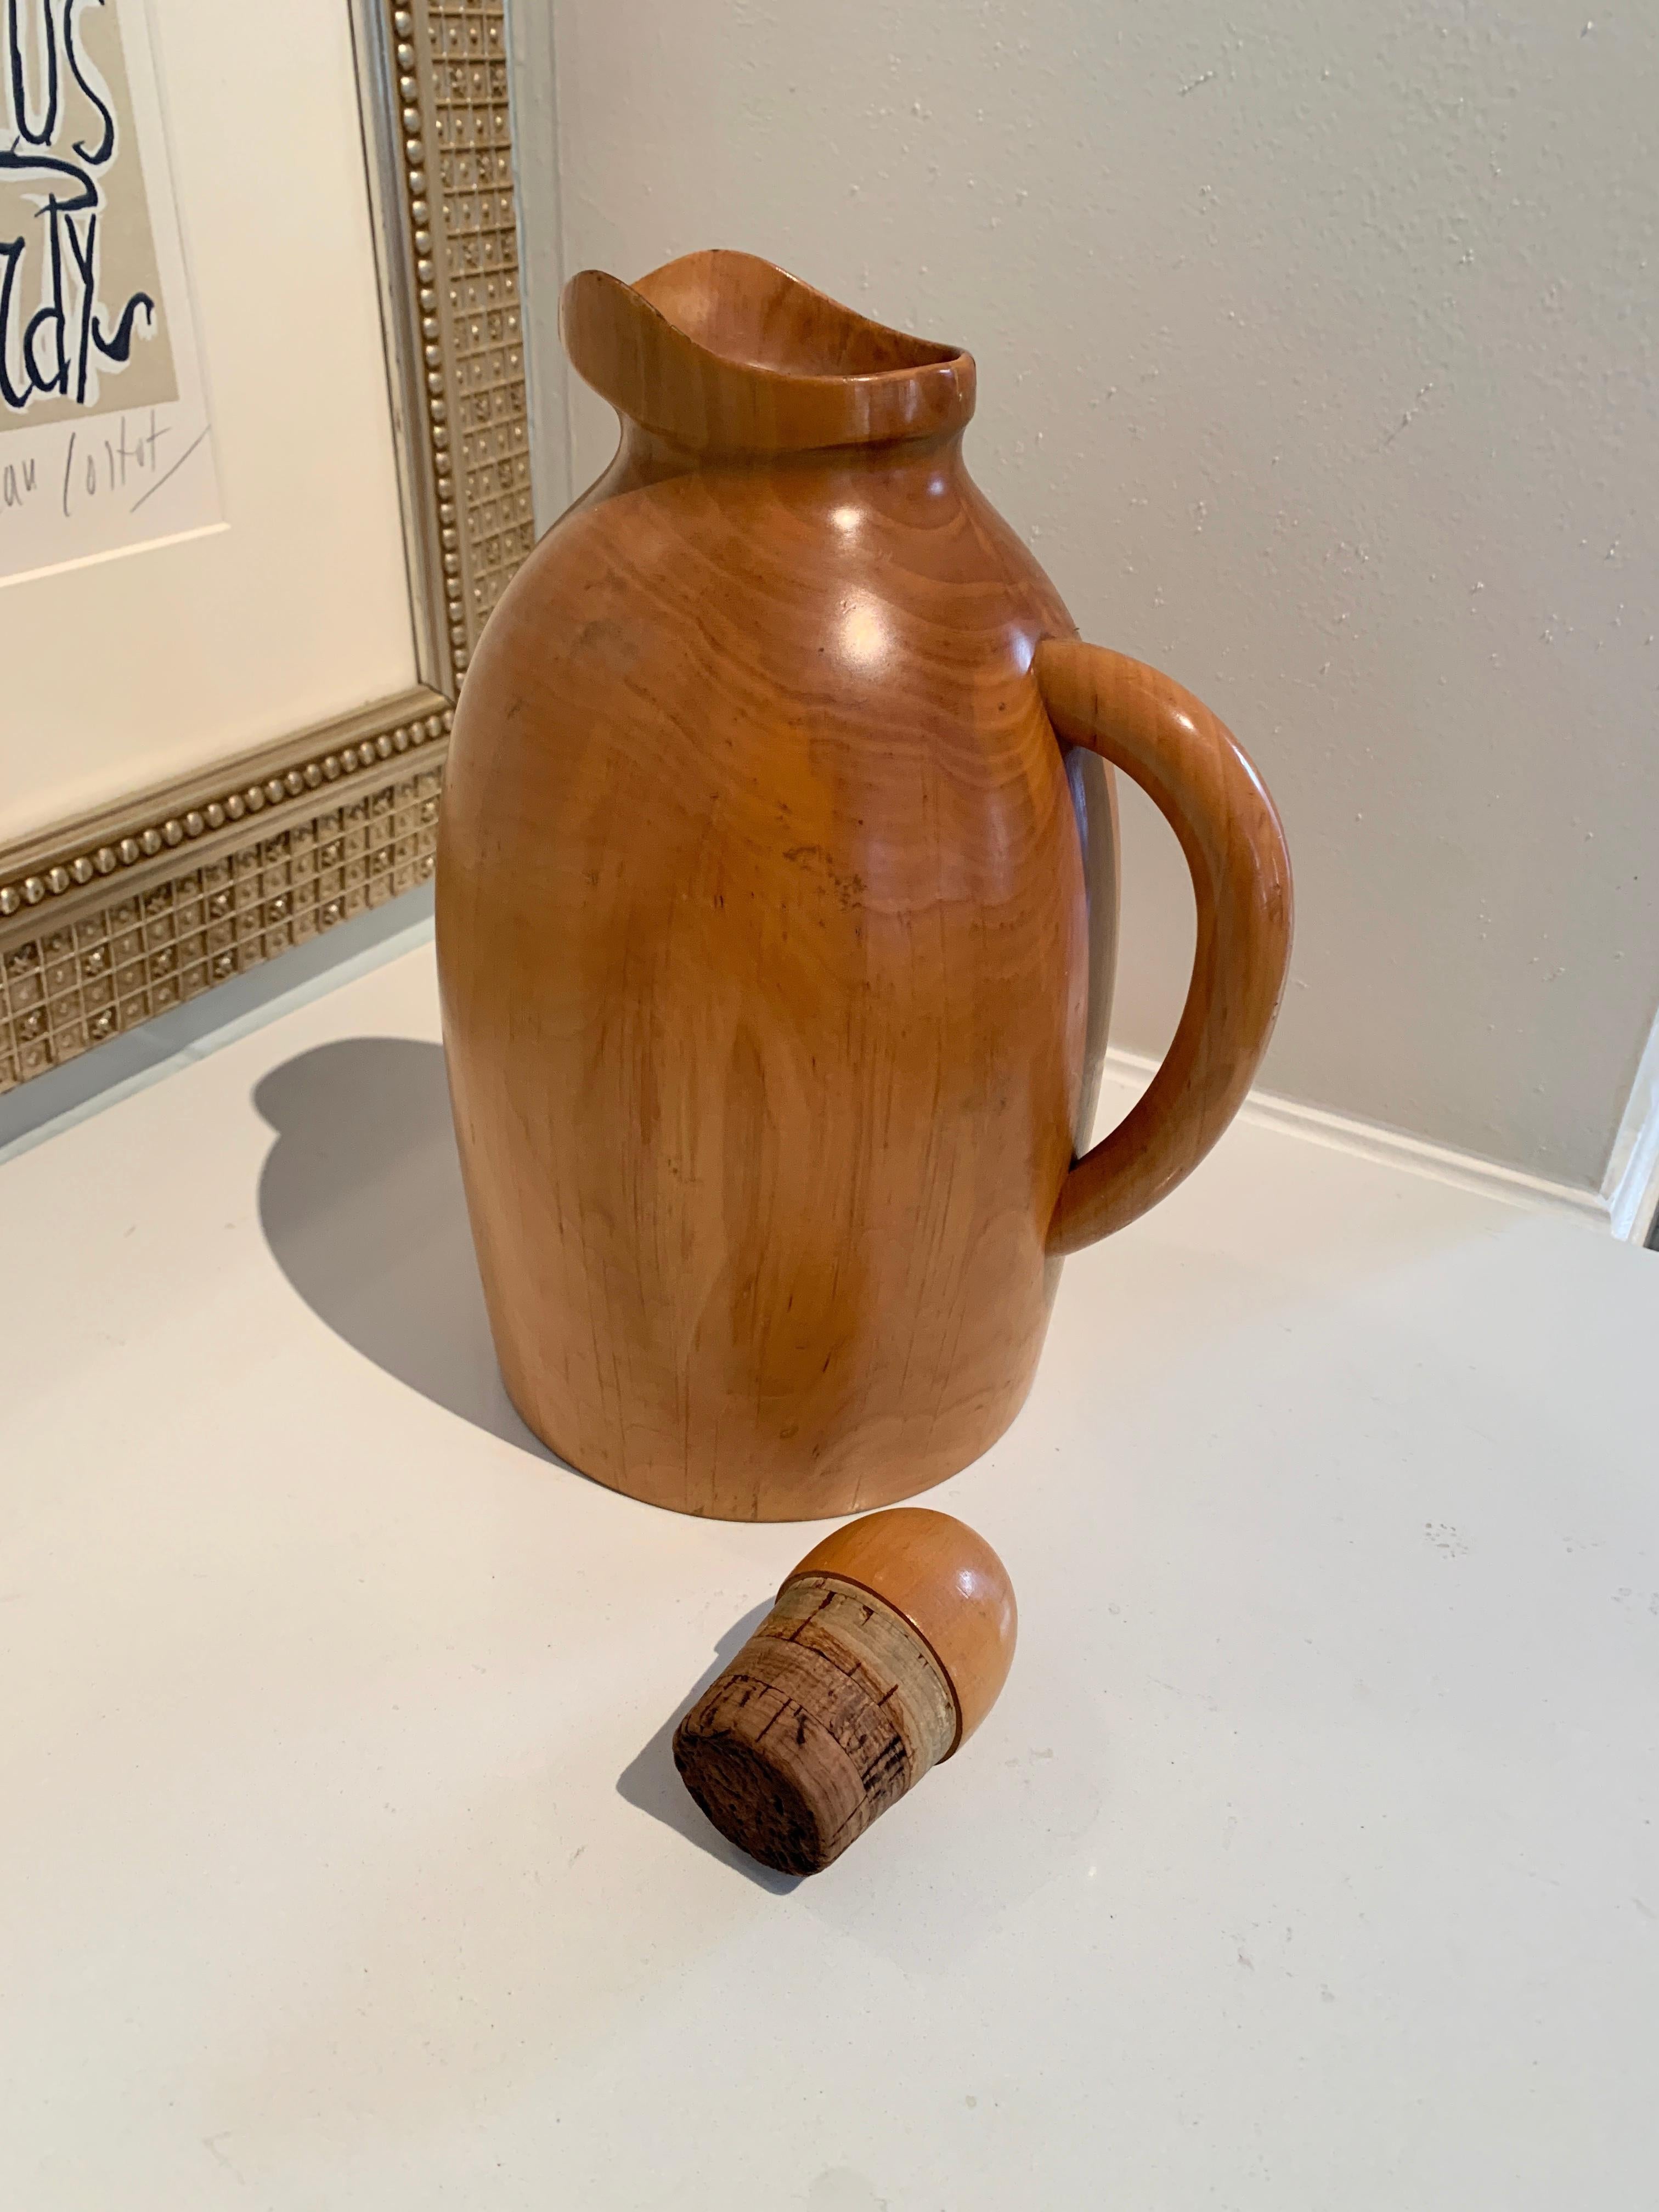 Exquisitely designed by Manzoni Pietro, the midcentury bar will be the conversation piece with your new all wood, and very chic Pitcher with glass thermos inside that can serve warm or cold, beautifully designed wood, frame with thermos and special